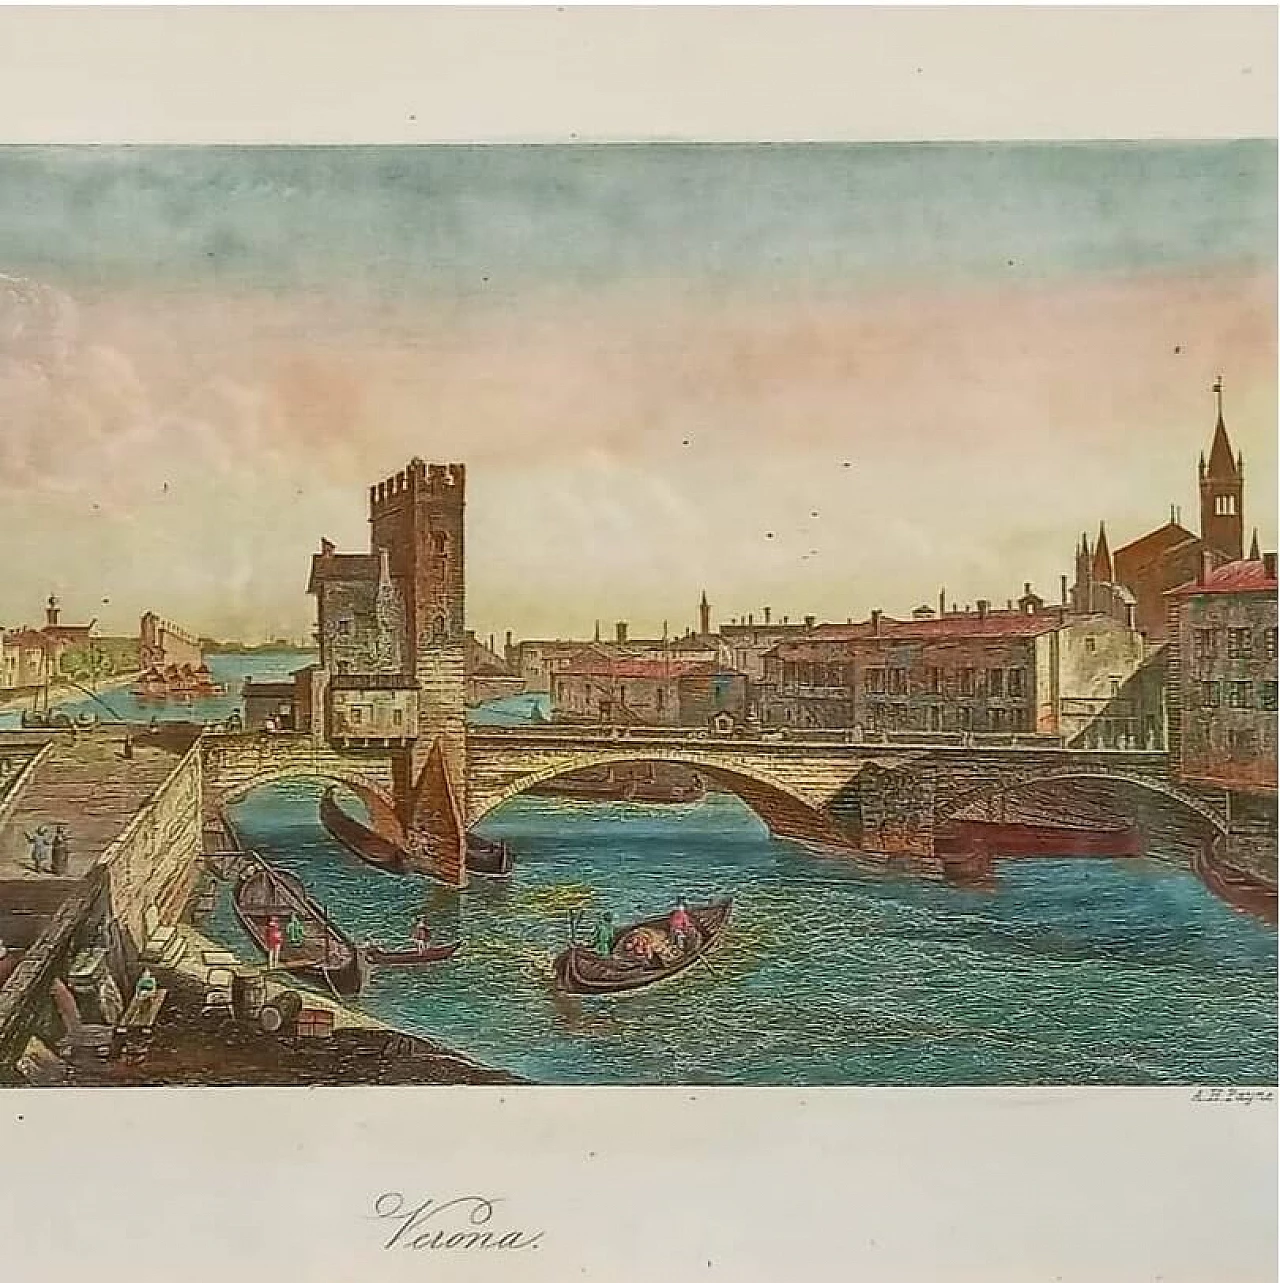 Albert Henry Payne, Verona, etching with watercolour, 1840 1